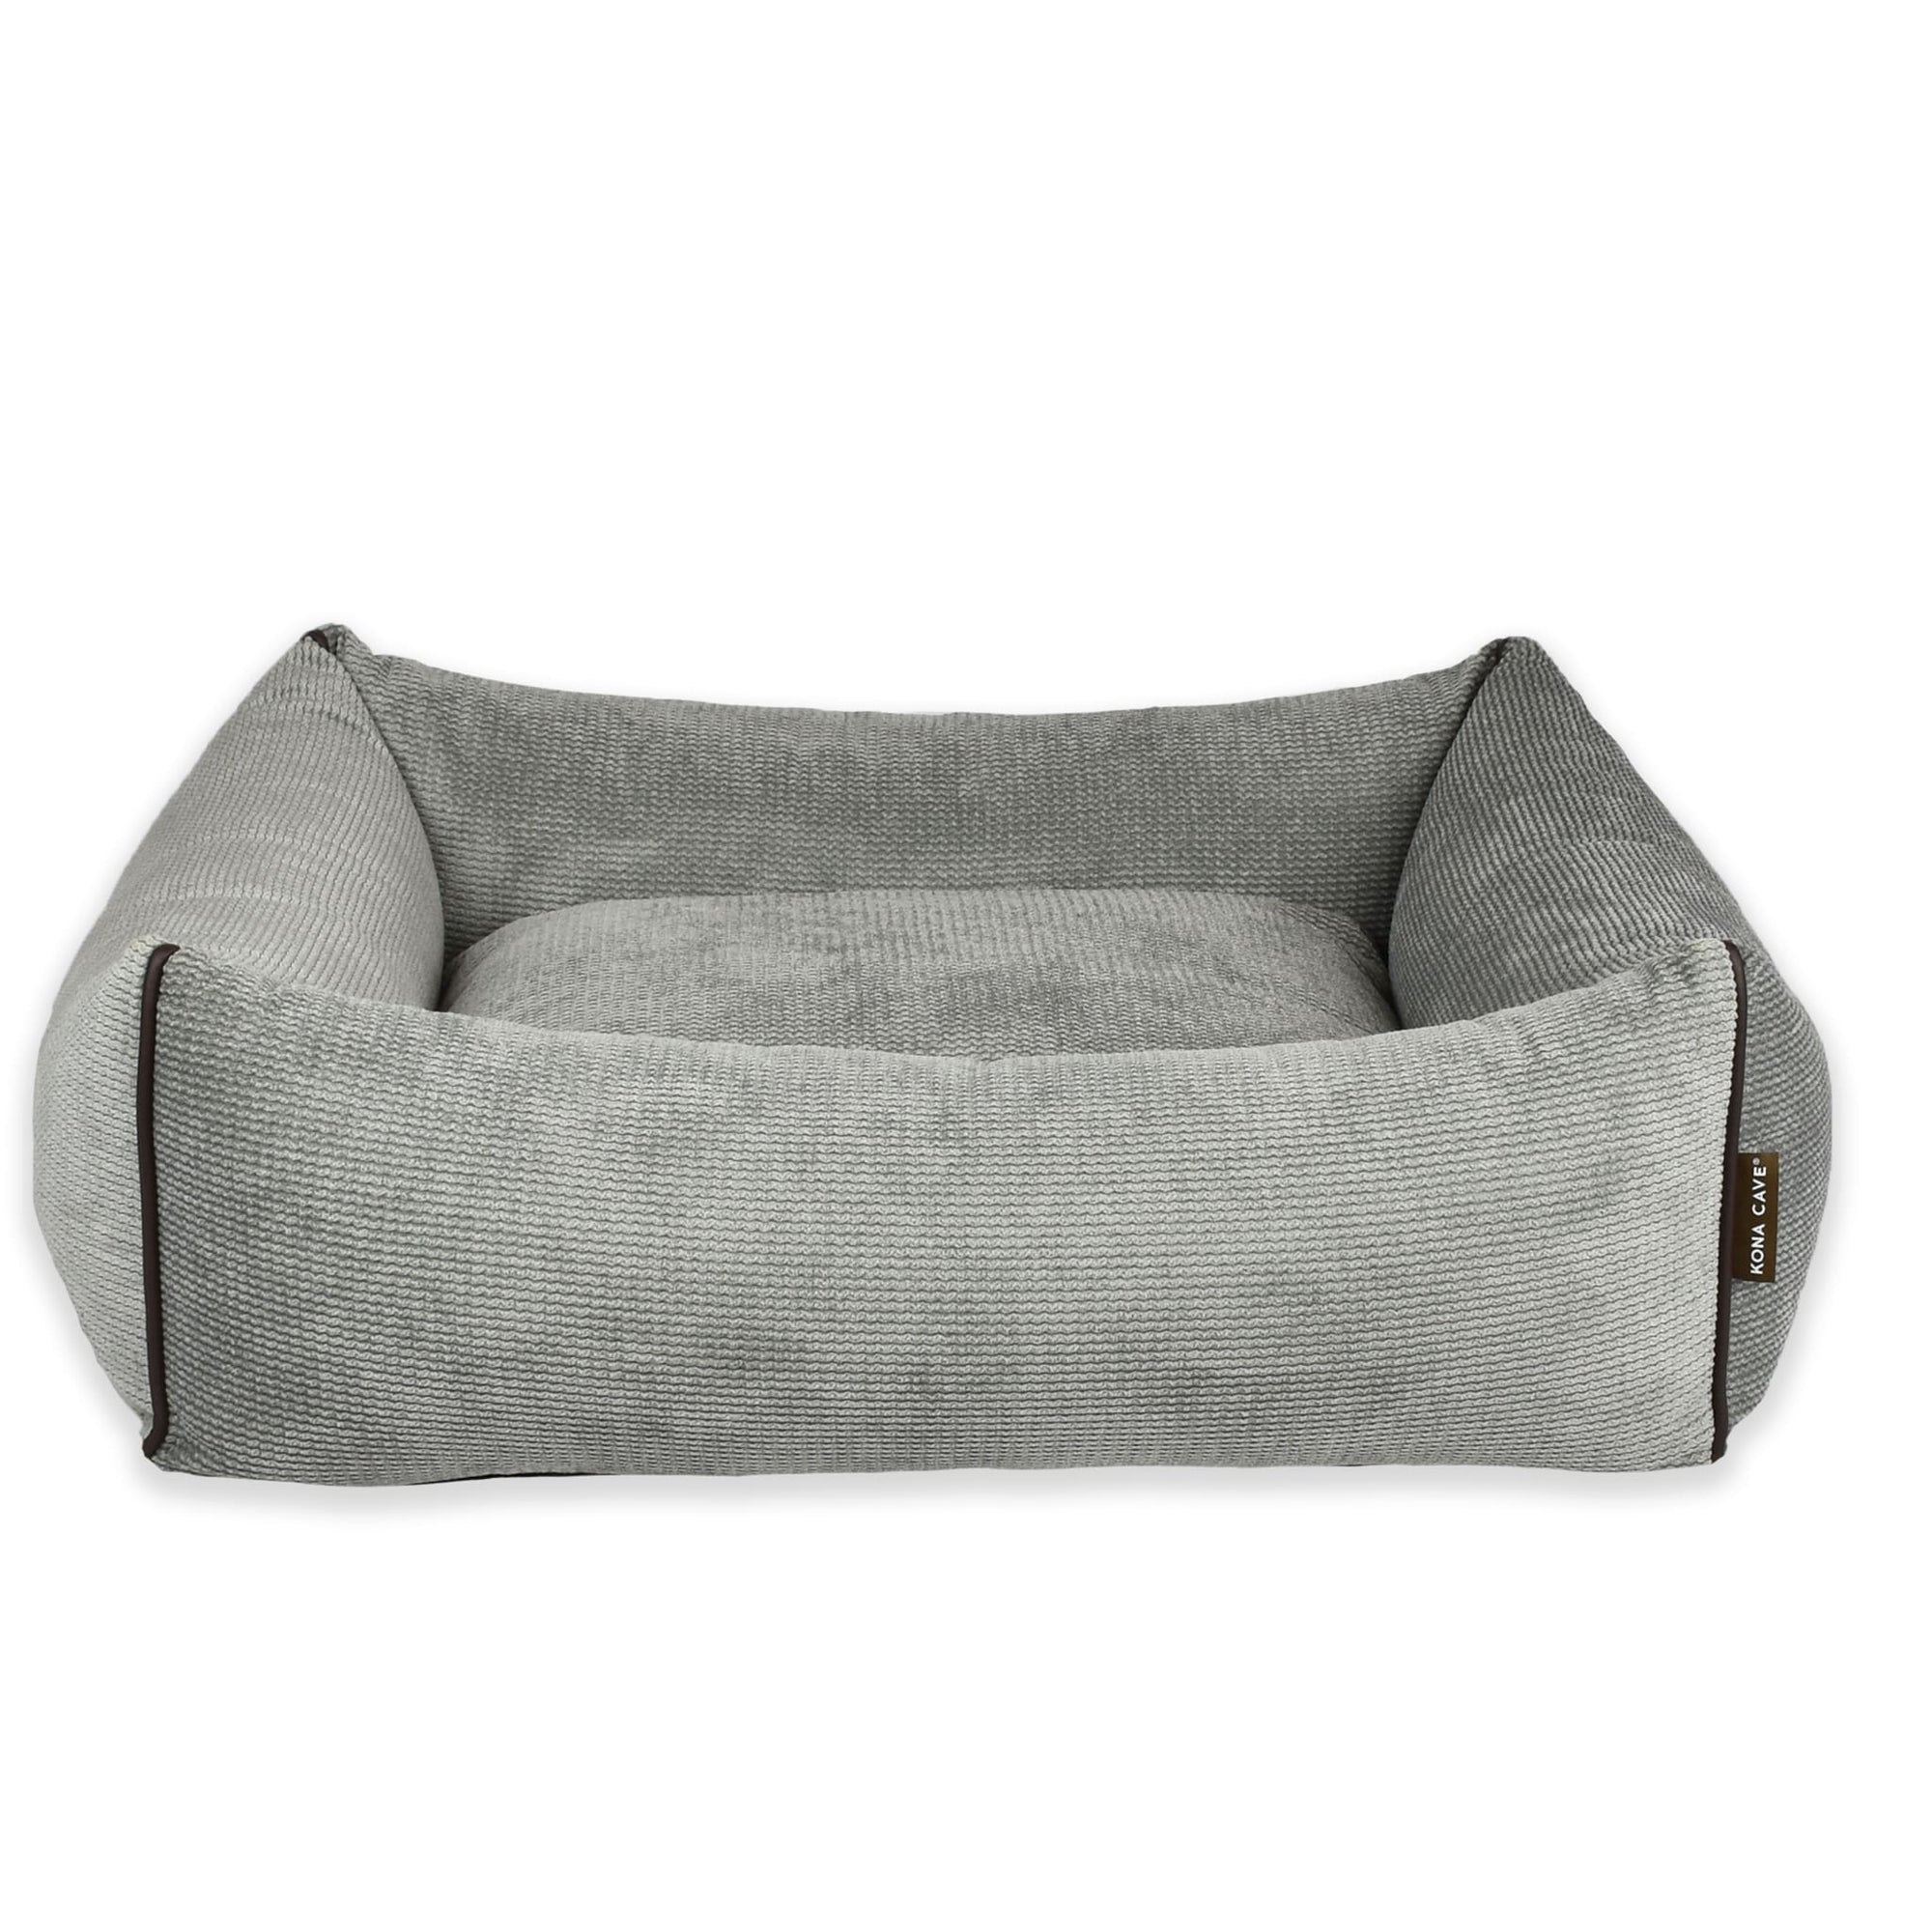 KONA CAVE® luxury Cuddle cave with removable canopy cover. Corduroy Bolster Bed. 